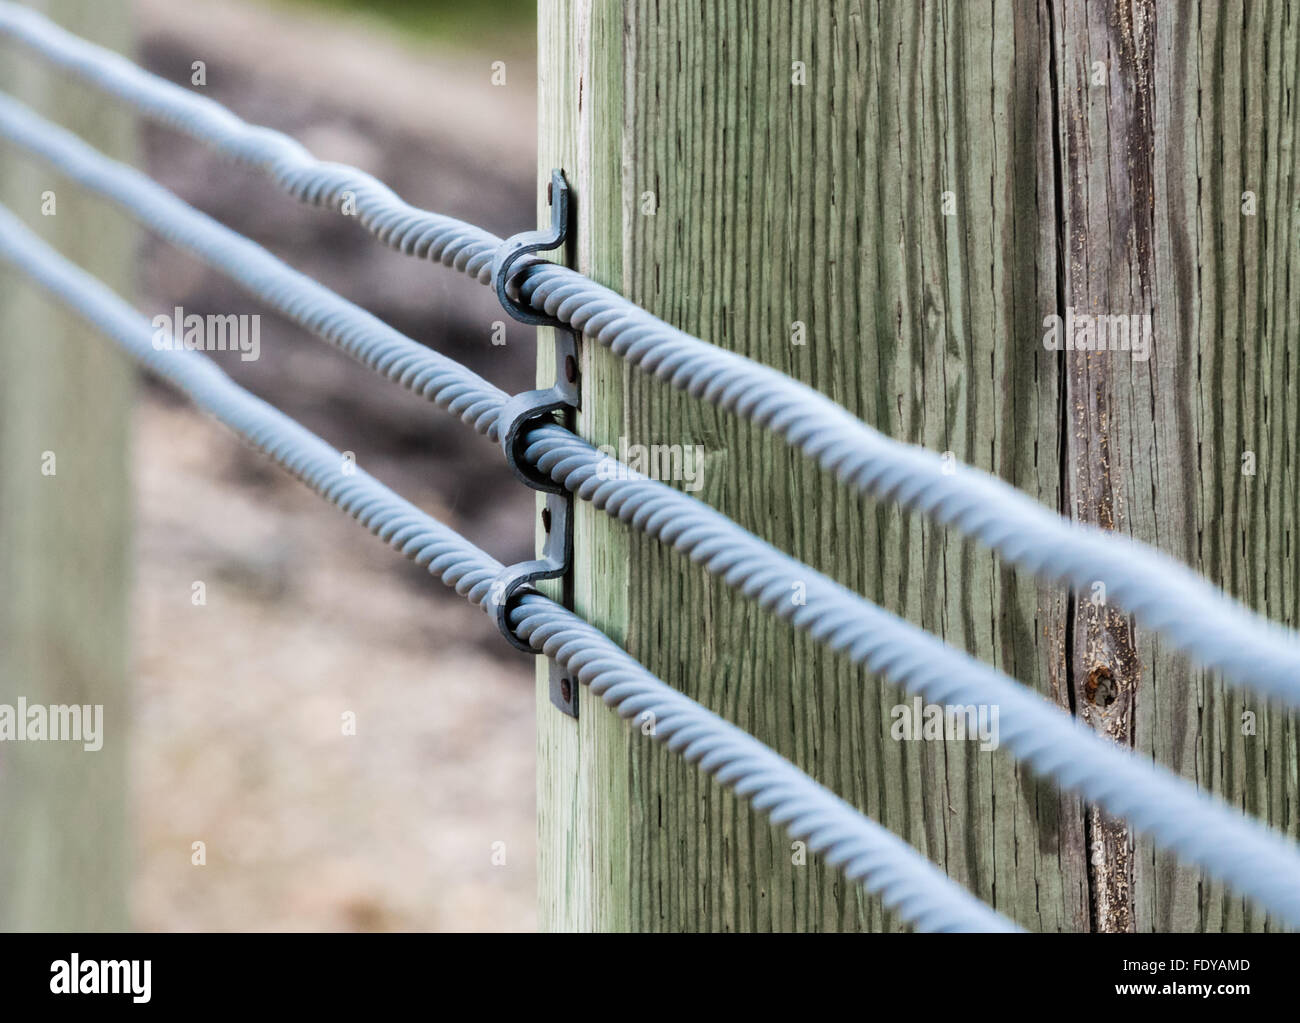 Close-up of three parallel metal cables fastened to wood block, with foreground and background blurred. Stock Photo